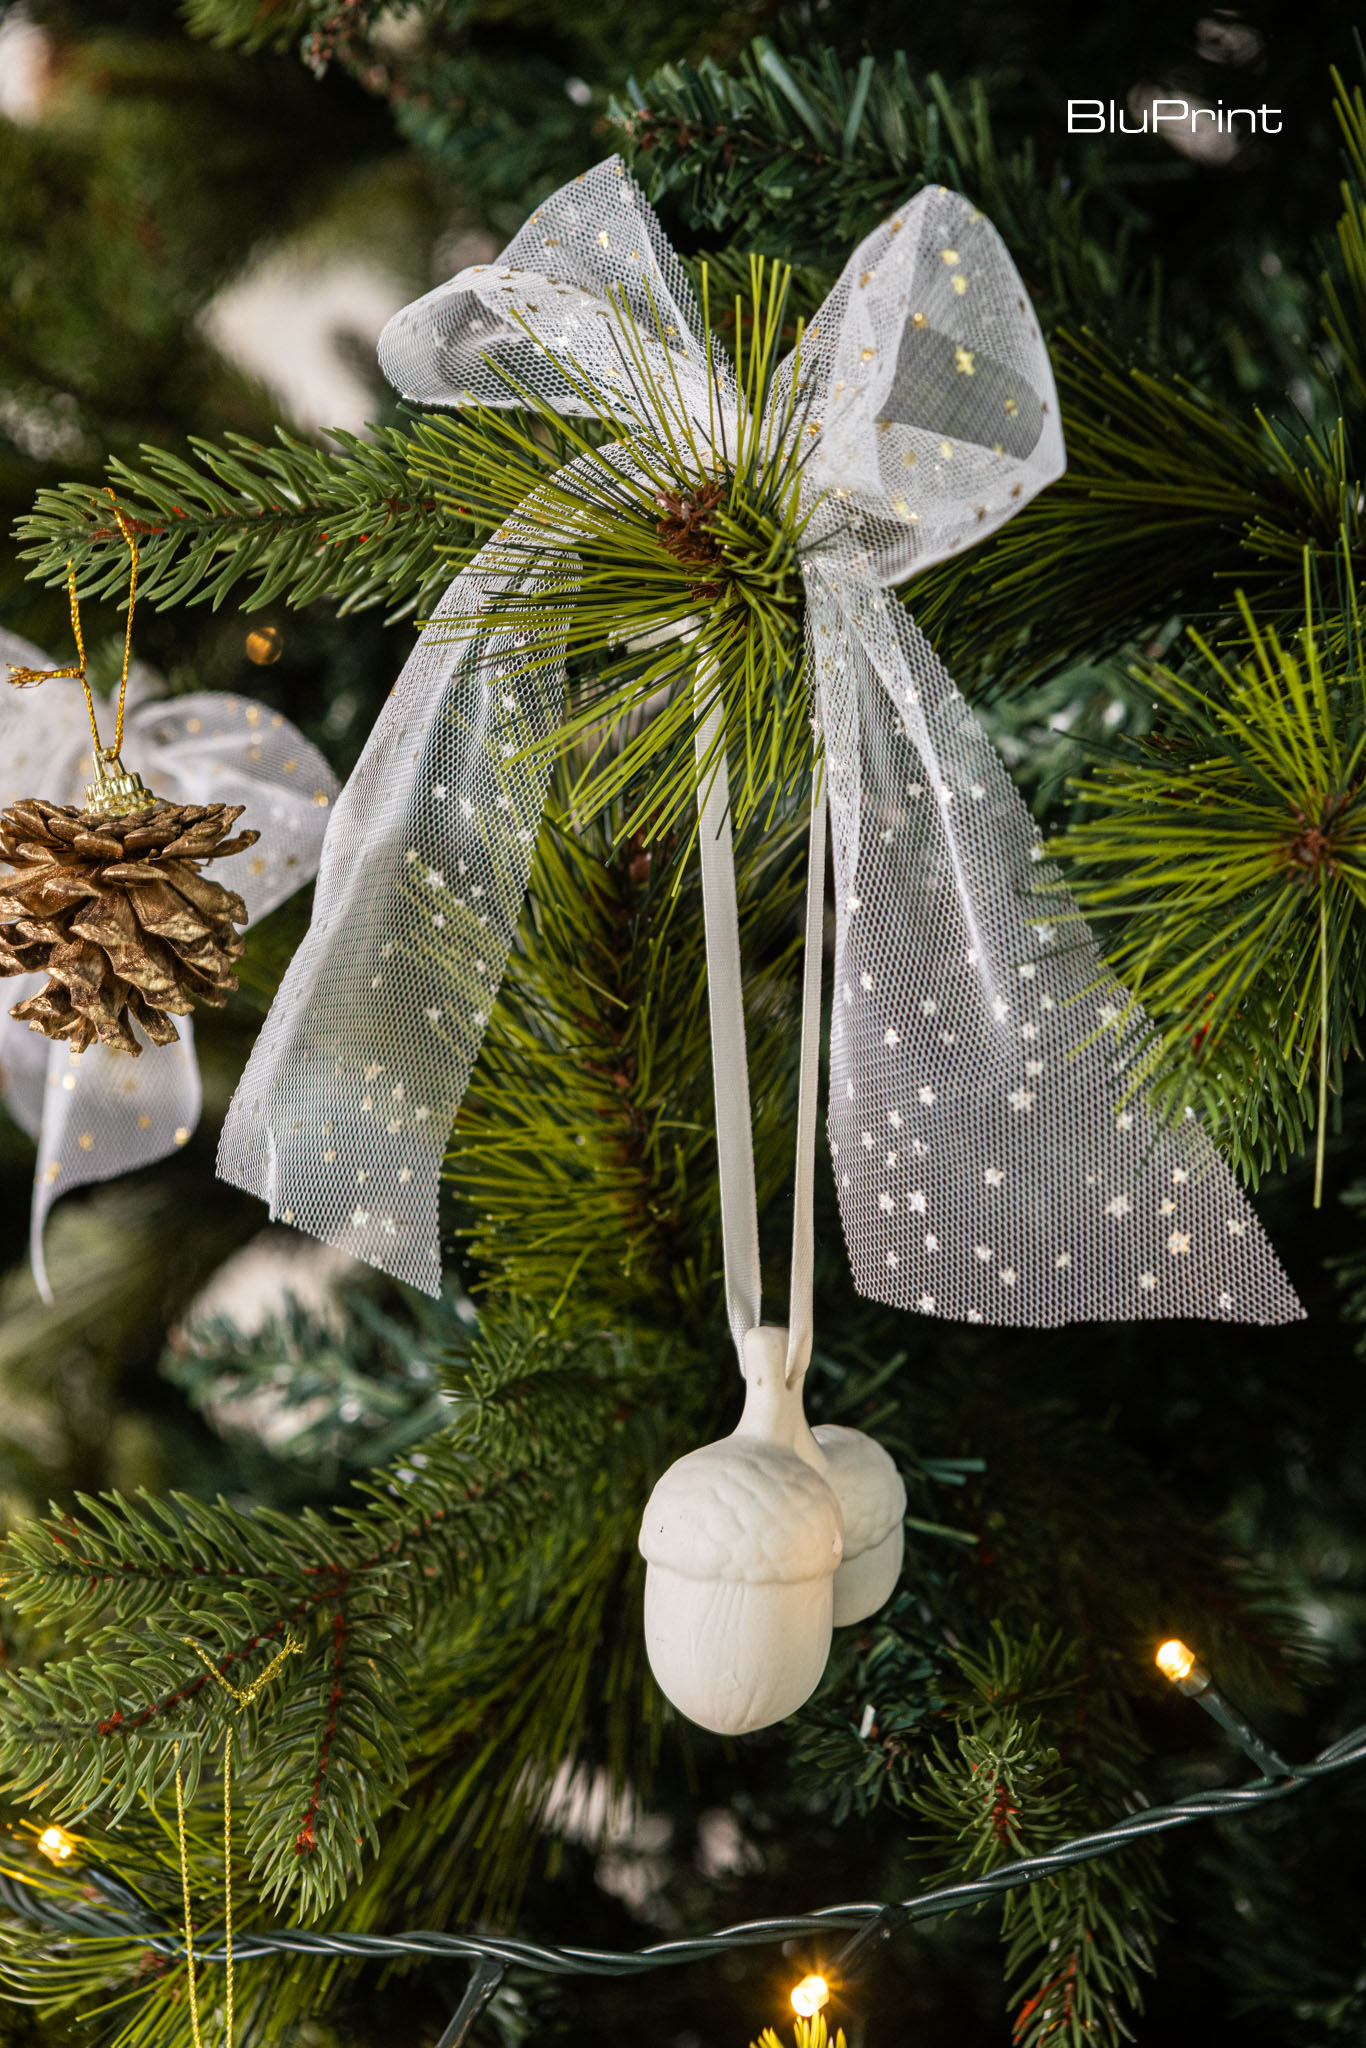 Porcelain Christmas ornaments hanging from a Christmas tree